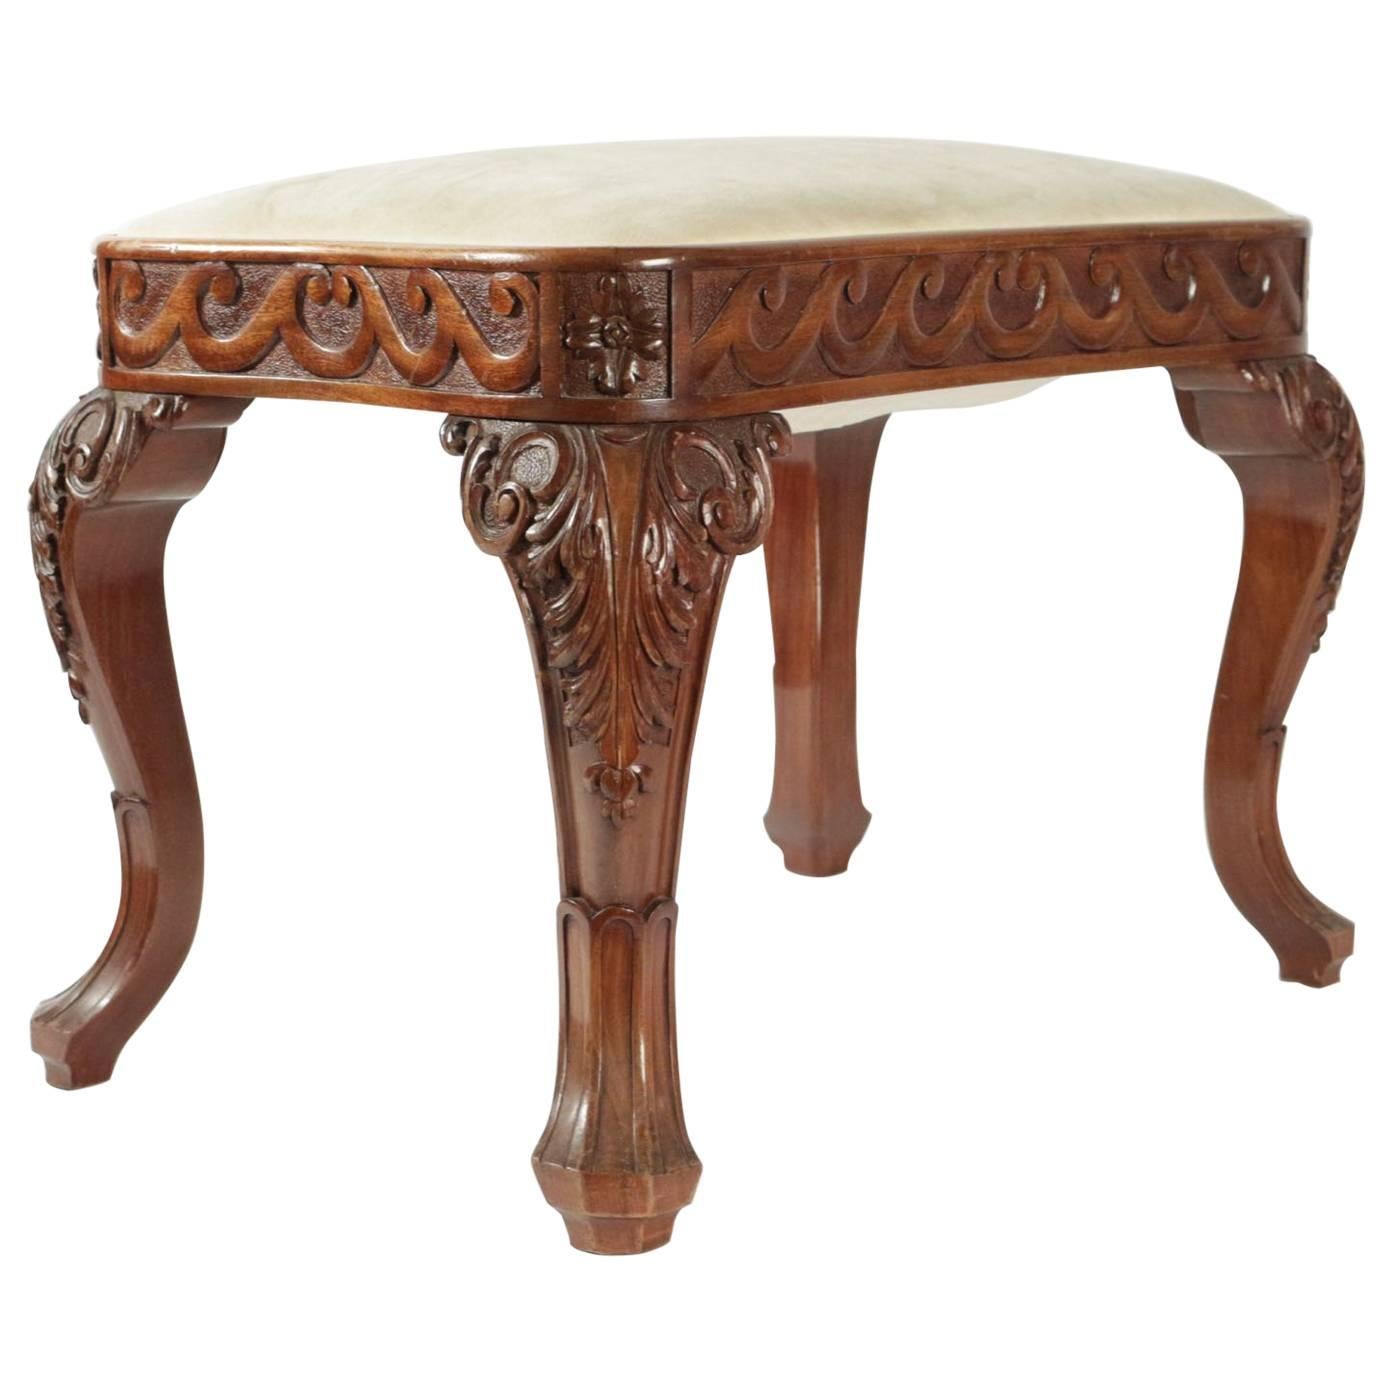 English Footstool in Solid Mahogany from the Beginning of the 20th Century